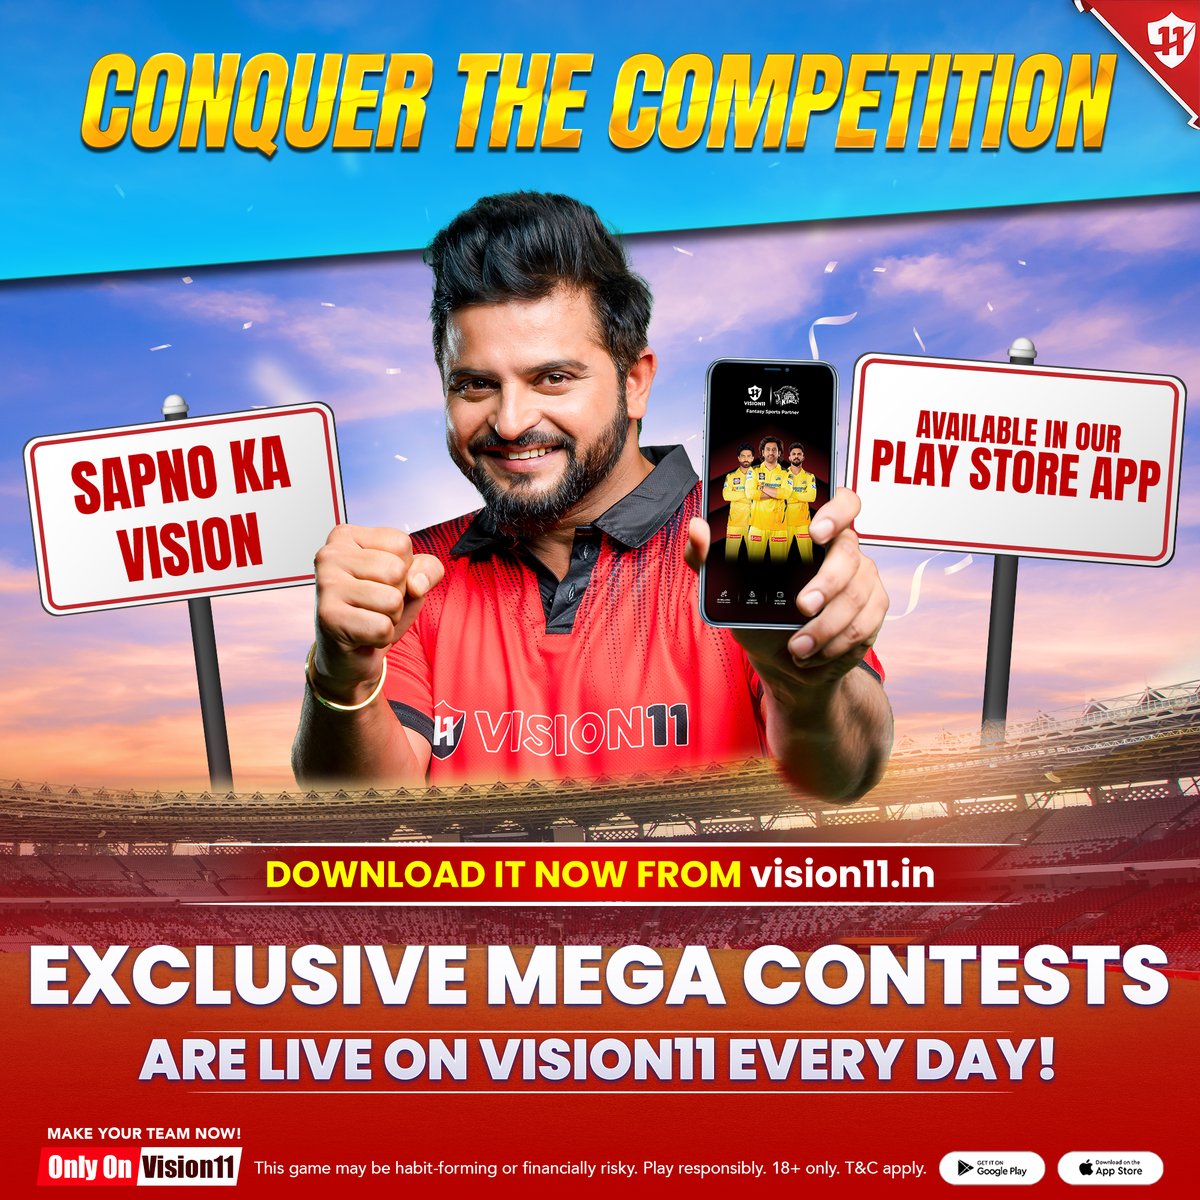 To provide you with the best rewards we are always ready with exclusive Mega GL contests!📱
Sign up for Vision11 and unleash your inner champion!🏏
.
.
.
#Vision11Fantasy #GreatWin #IskiJhalakSabseAlag #FantasySportsApp #Vision11 #WinBig #JoinVision11 #FantasySports #MegaGL